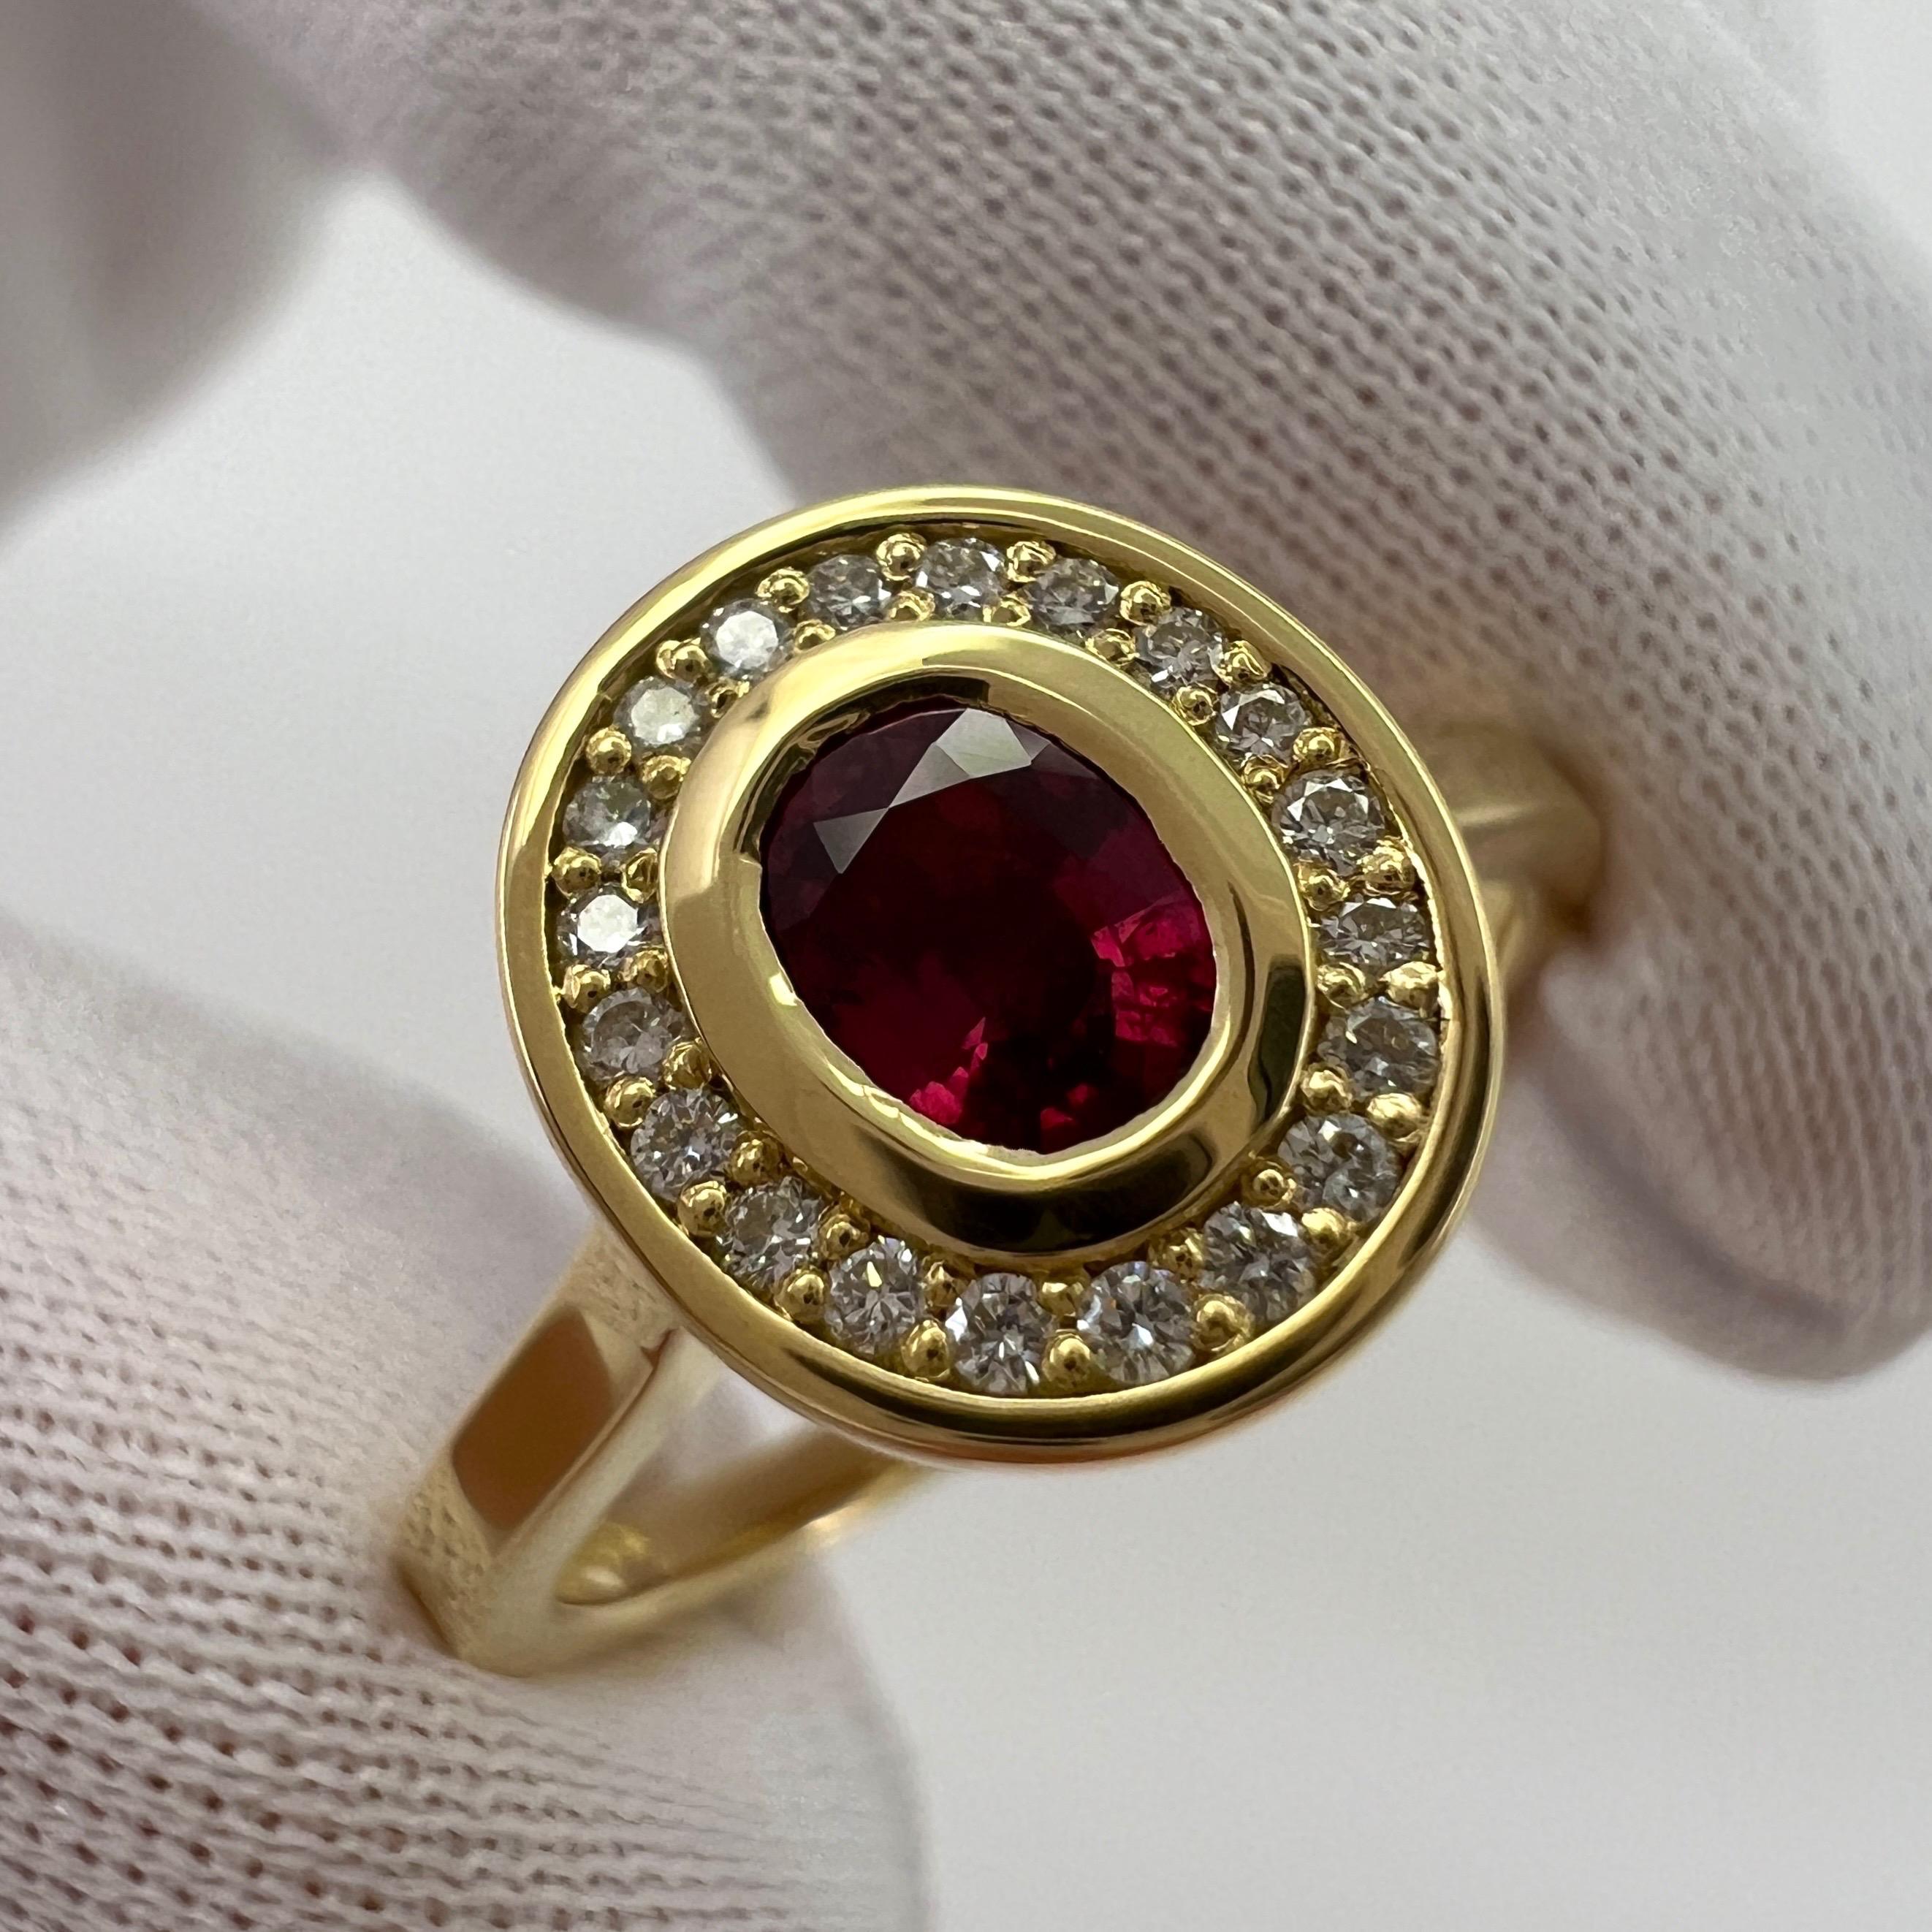 Fine Untreated Deep Red Ruby And Diamond 18k Yellow Gold Halo Ring.

Stylish modern halo ring featuring a fine natural deep red untreated/unheated ruby with a carat weight of 0.62ct. This ruby has an excellent oval cut and very good clarity, a very